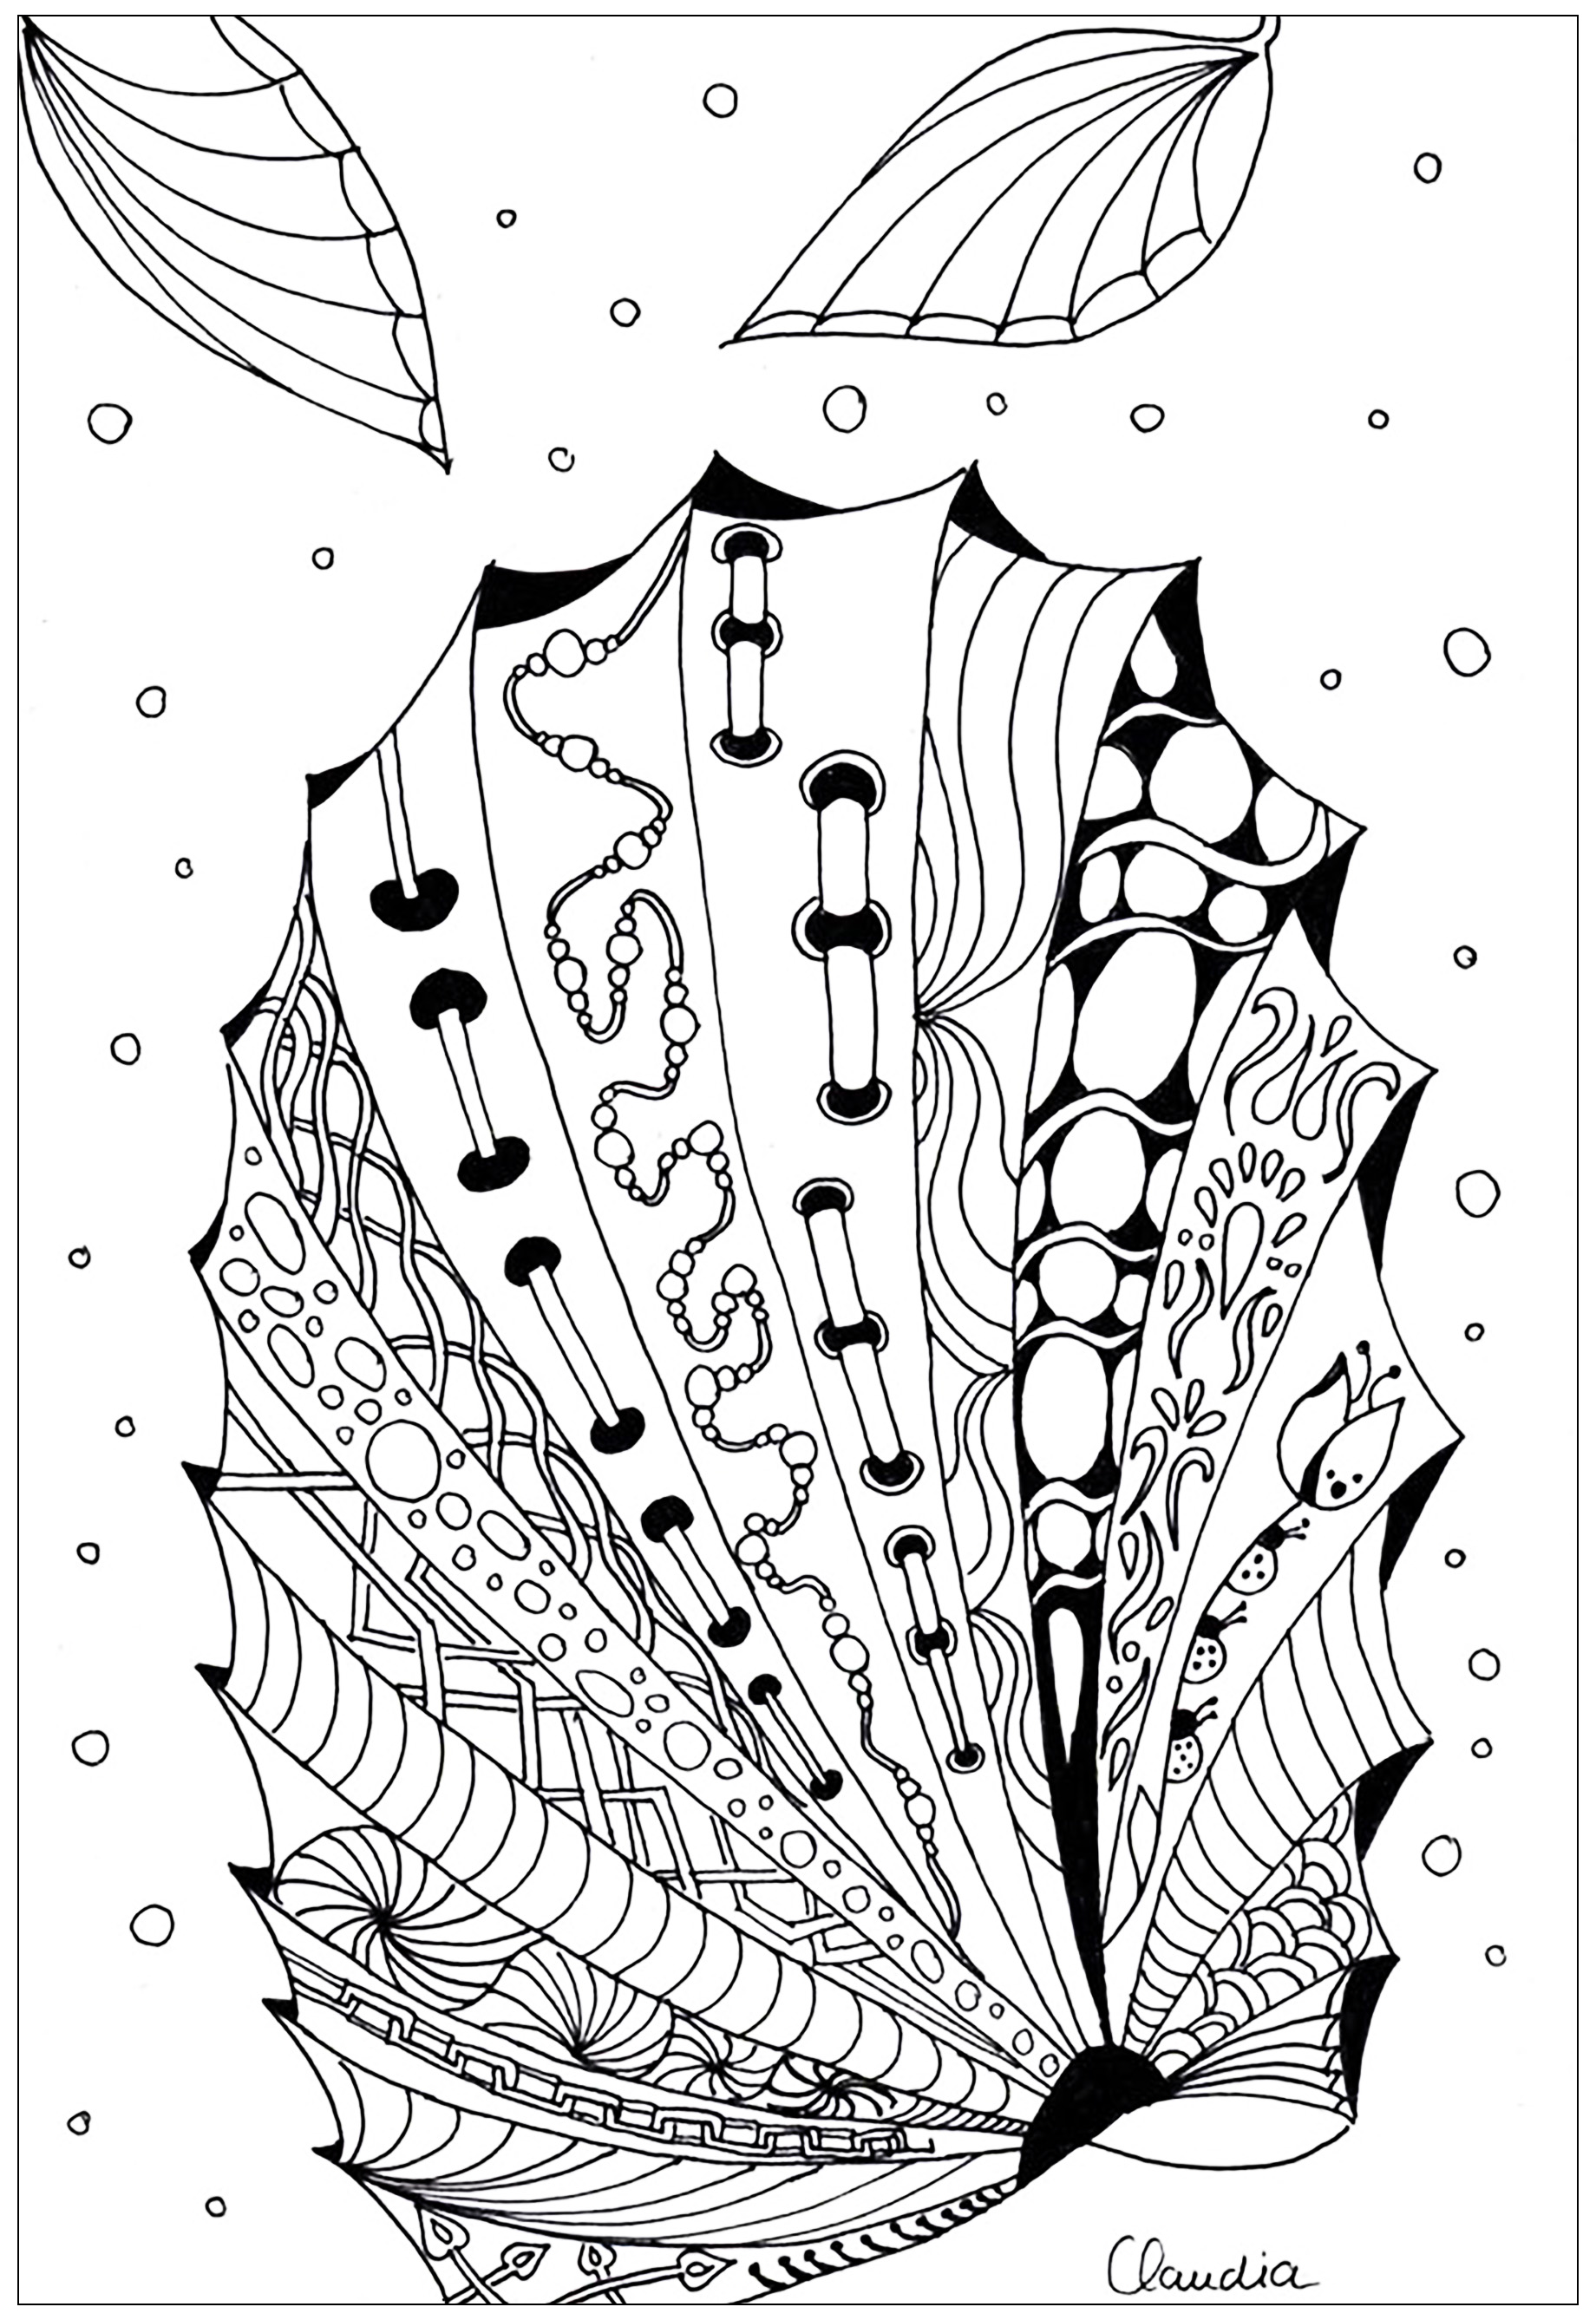 Incredible Zentangle coloring page to print and color for free